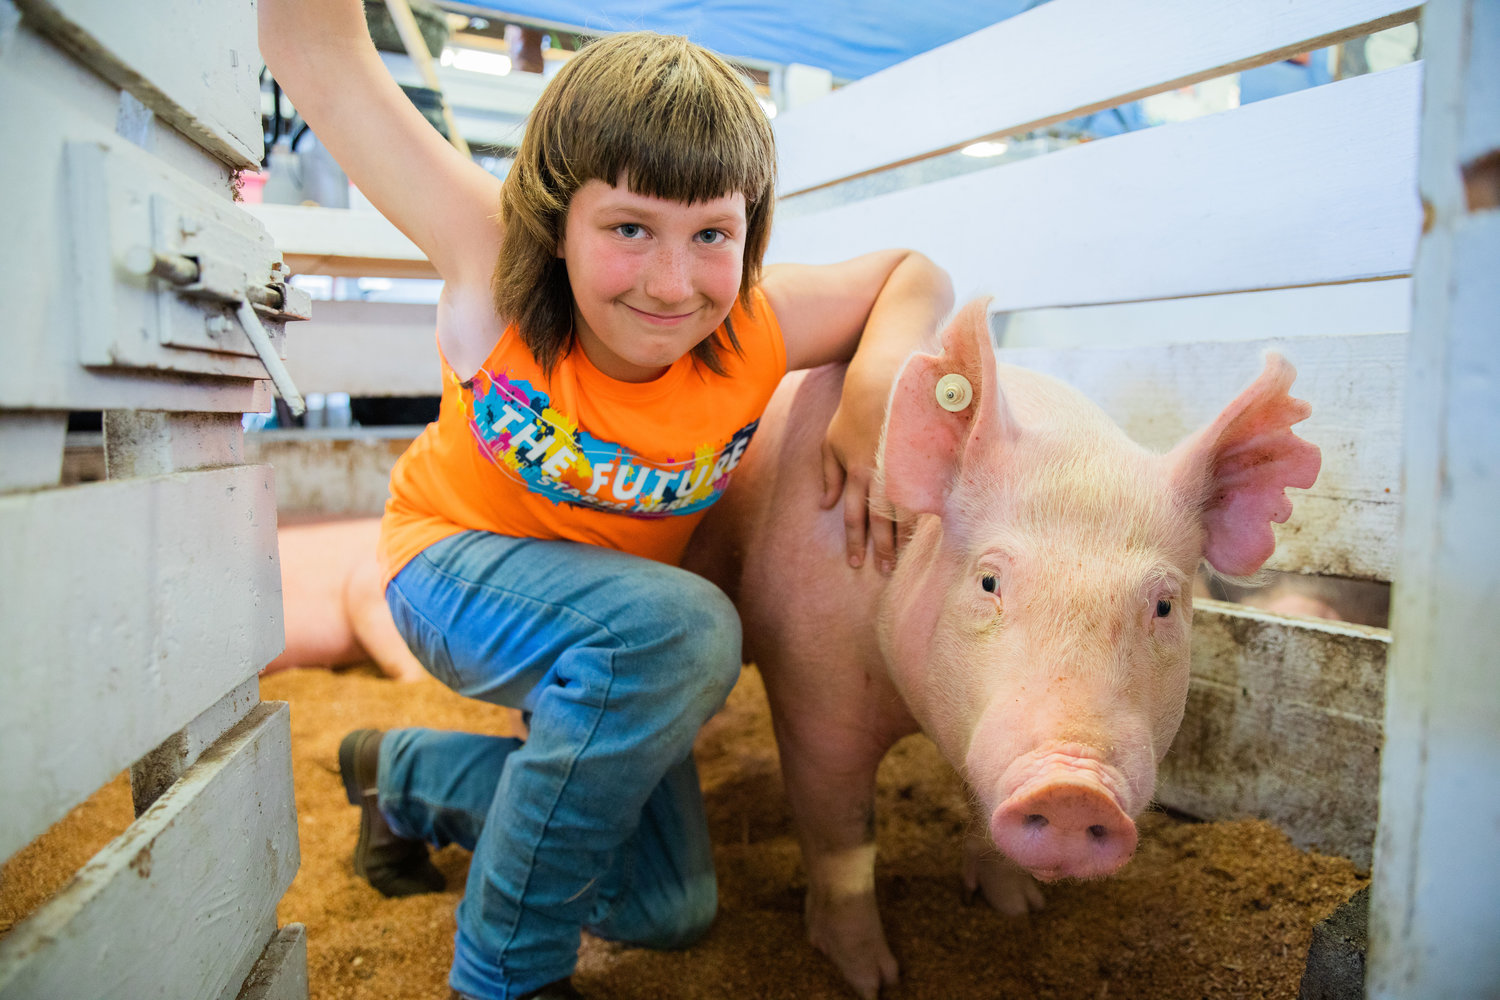 Dalton South, 12, of Pe Ell, smiles for a photo with Bacon, a Yorkshire-mix, Monday at the Southwest Washington Fairgrounds in Centralia.